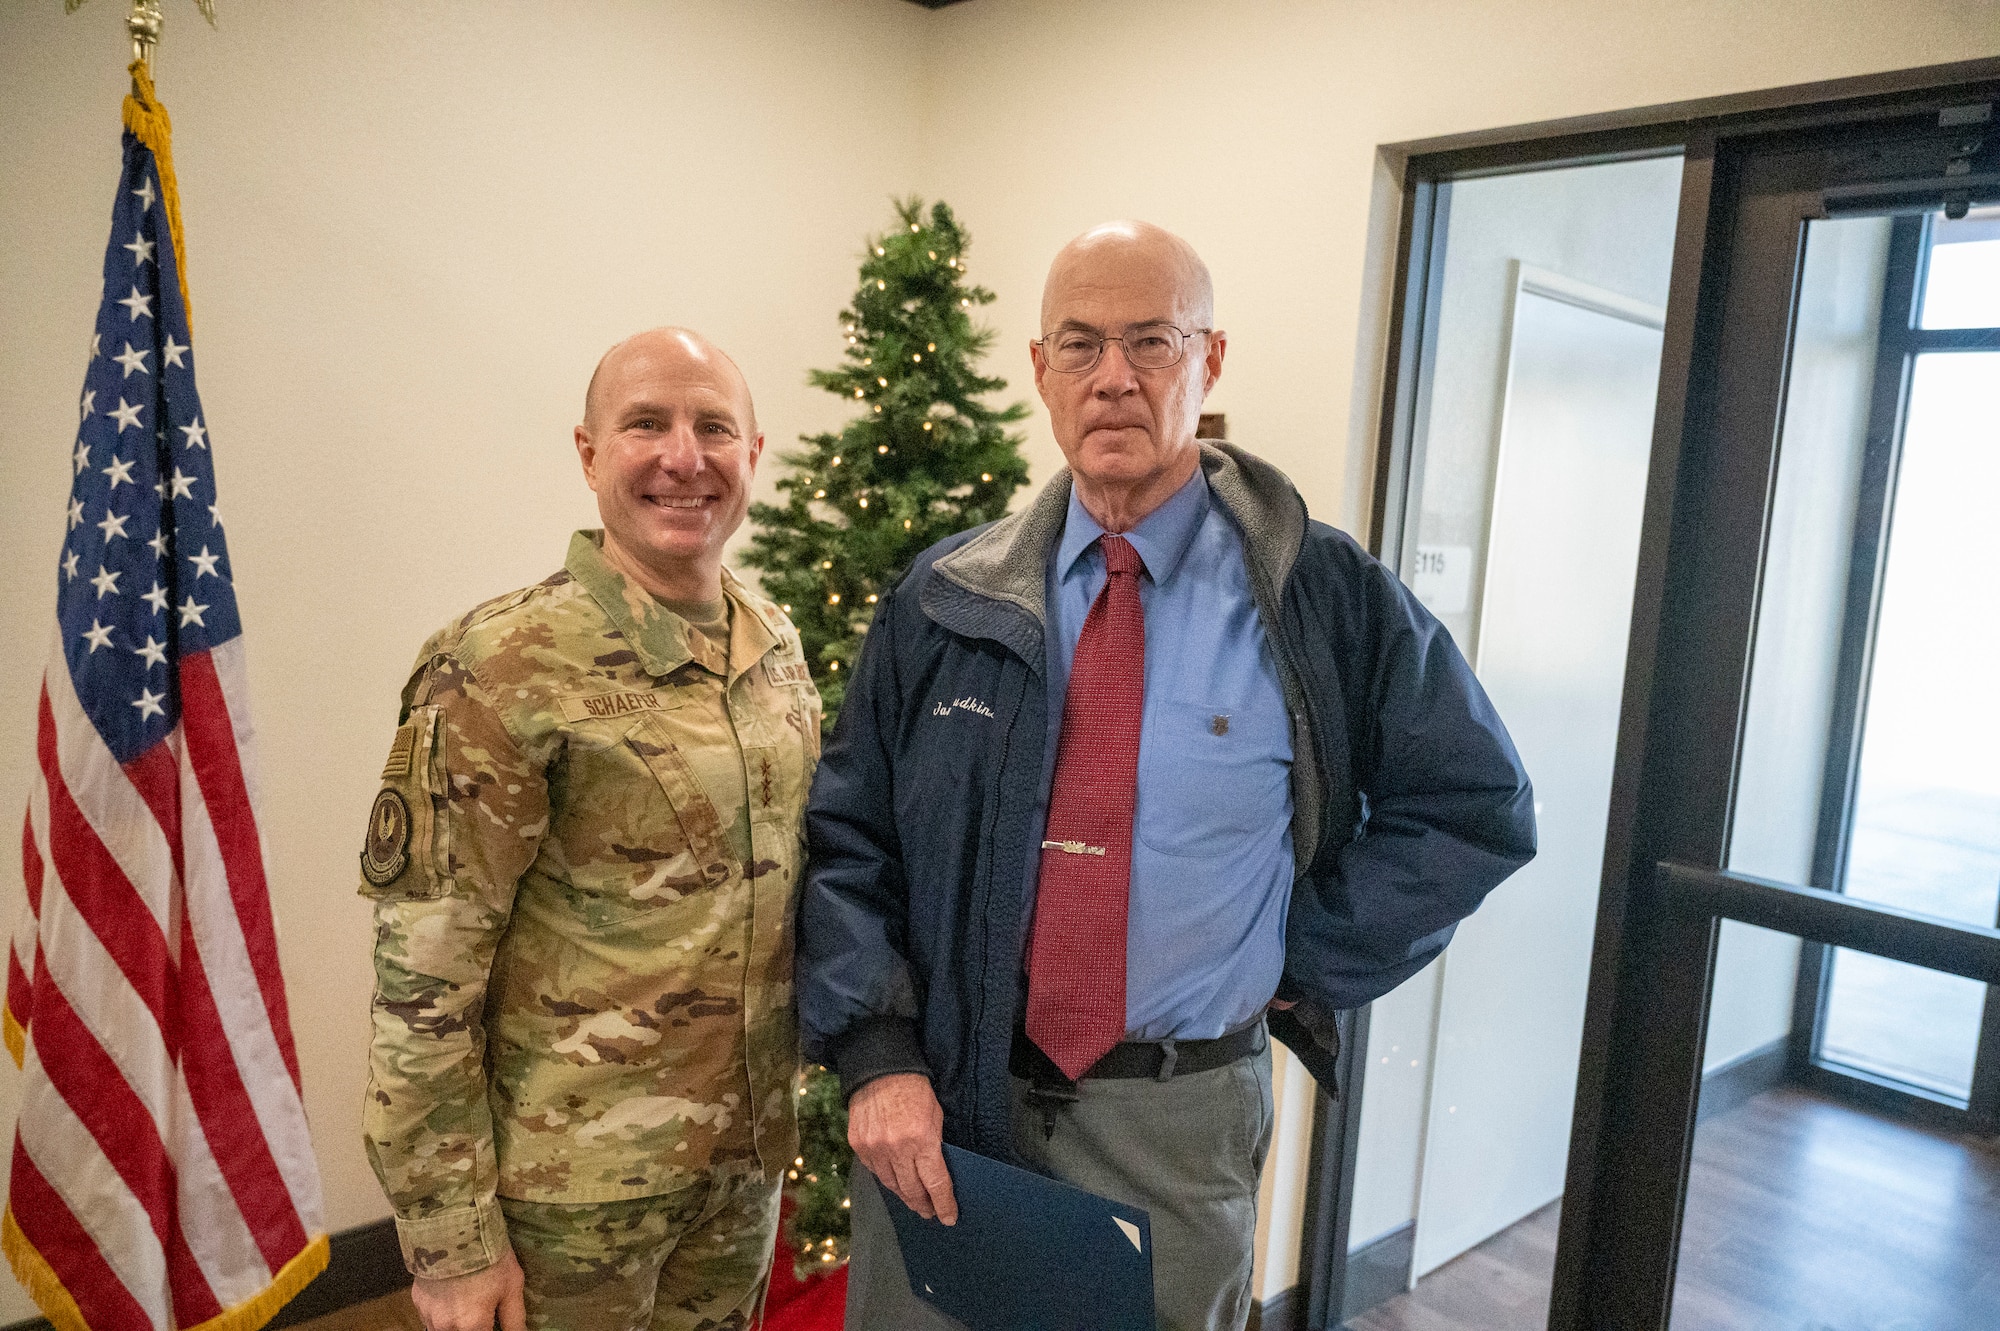 Lt. Gen. Carl E. Schaefer, Deputy Commander, Air Force Material Command takes a photo with Mr. James Judkins, 412th Civil Engineering Group Director after being recognized with the Certificate of Service.